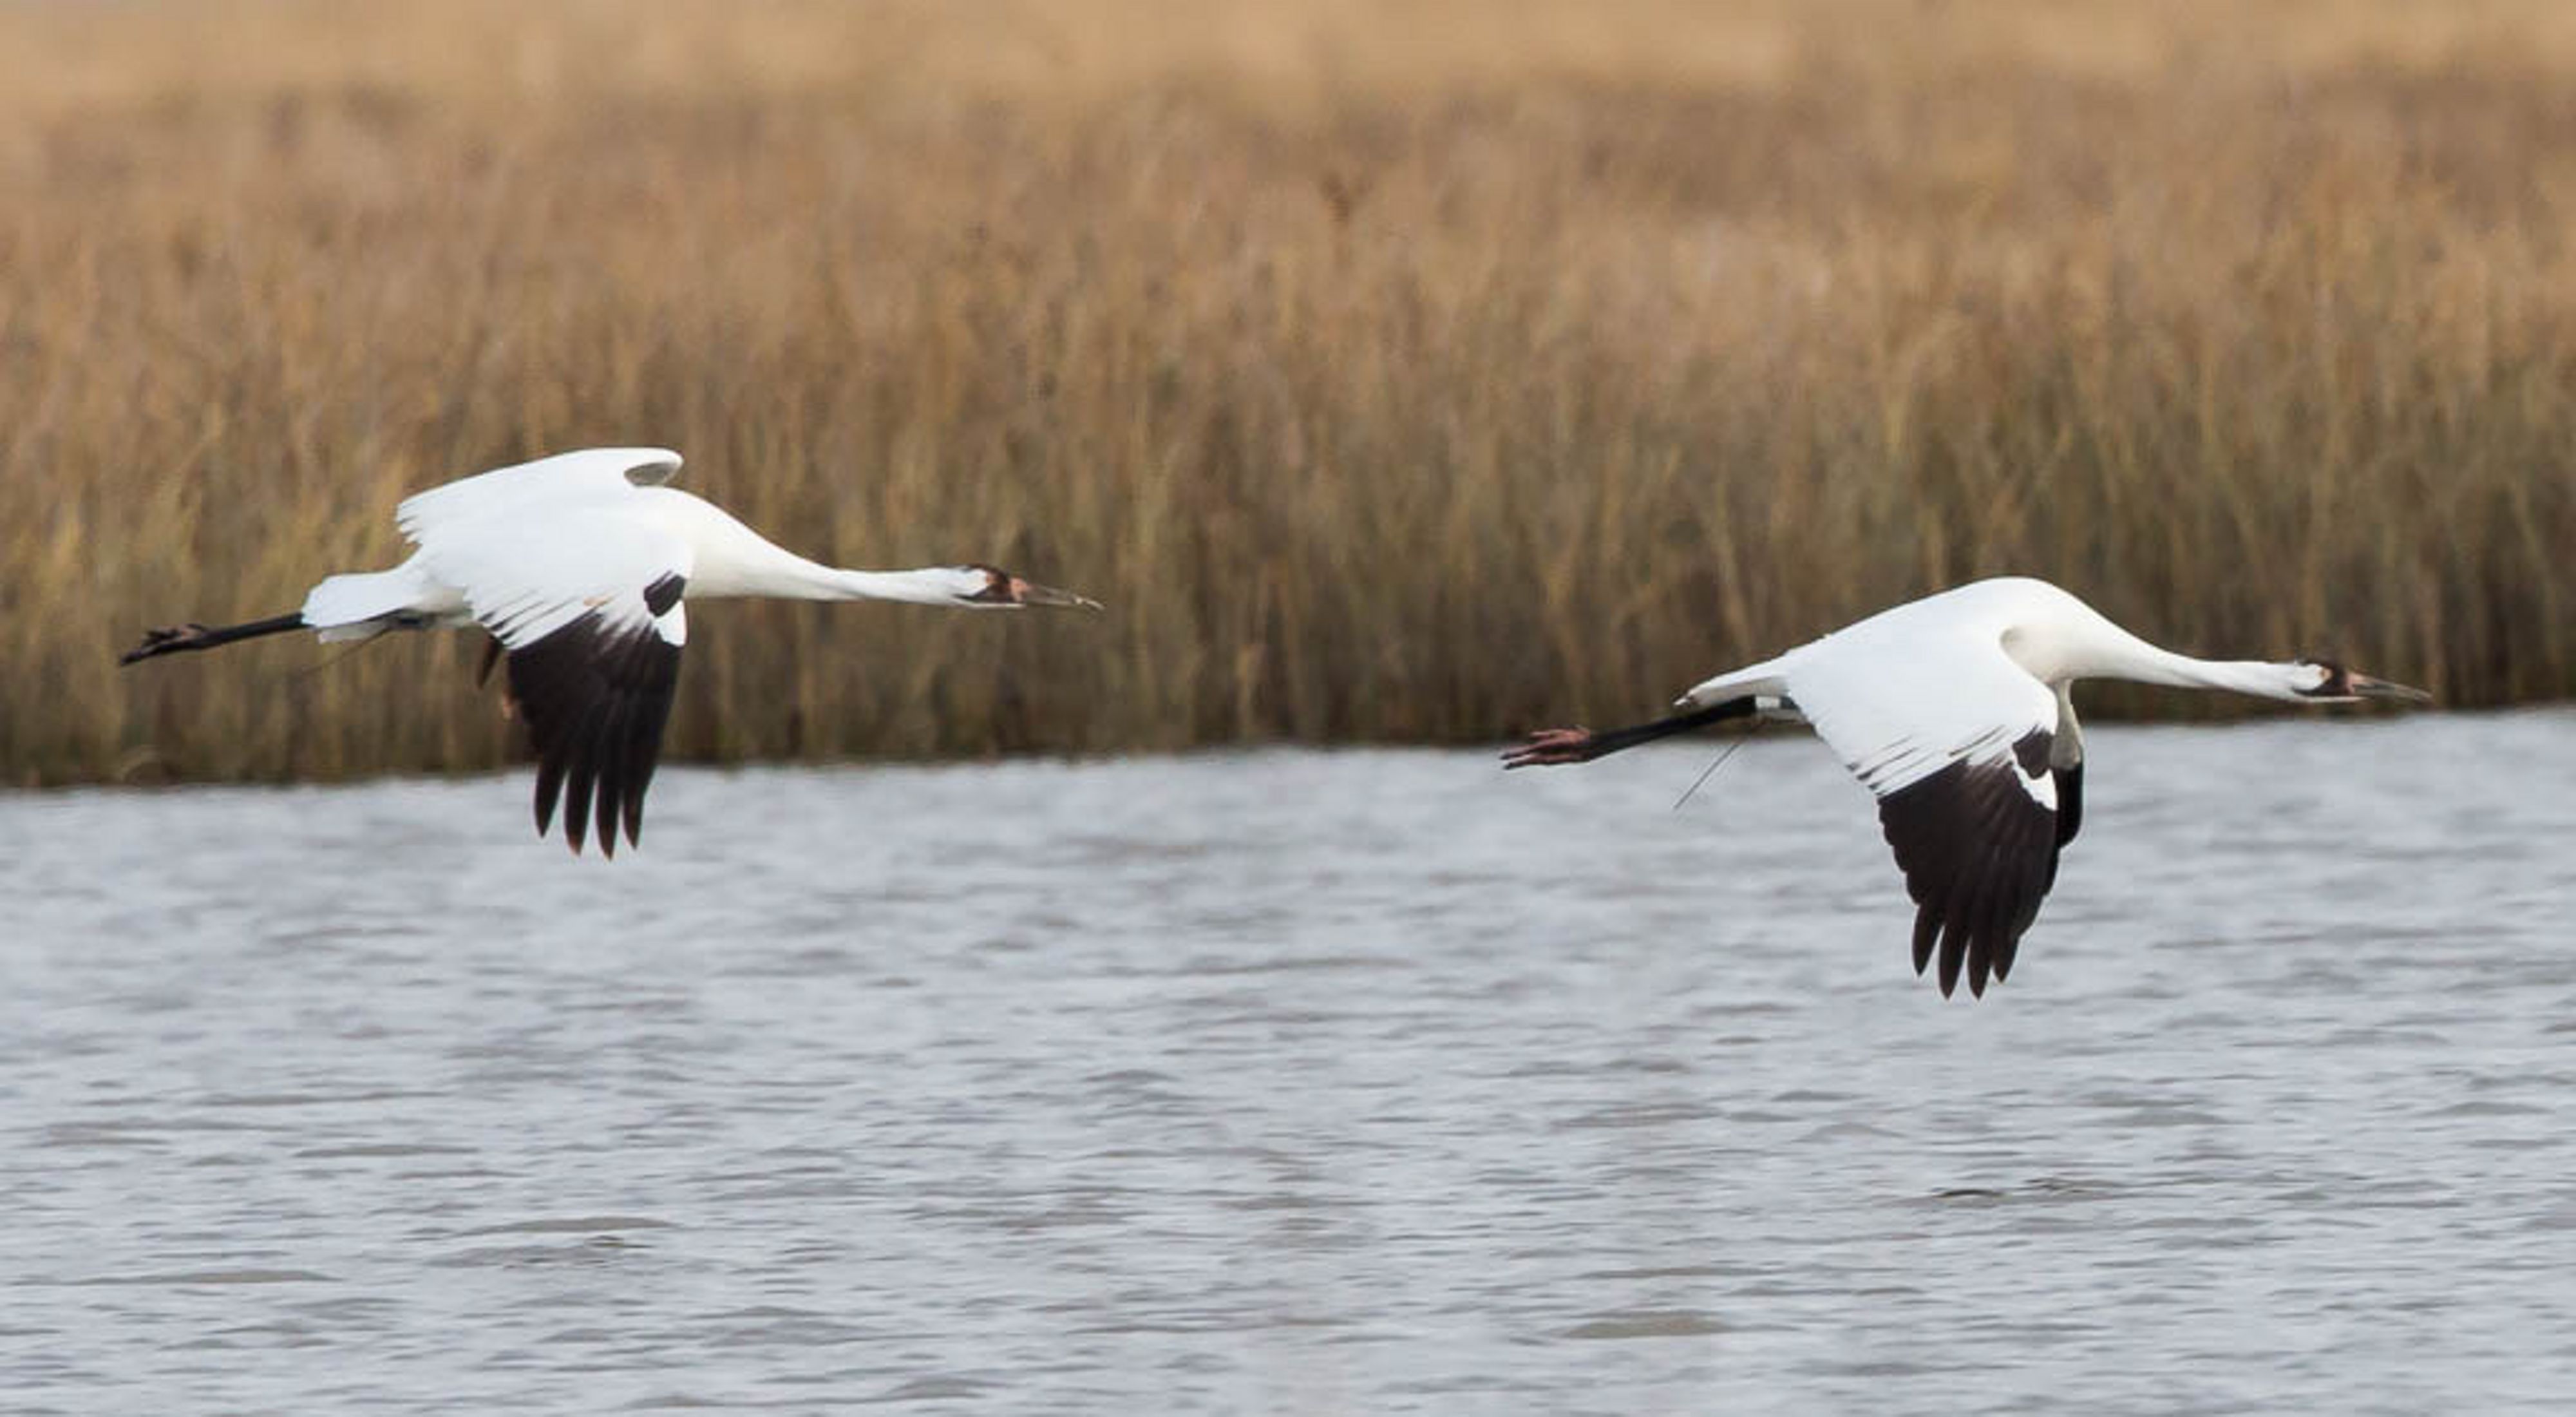 Two white and black whooping cranes mid-flight over a lake.